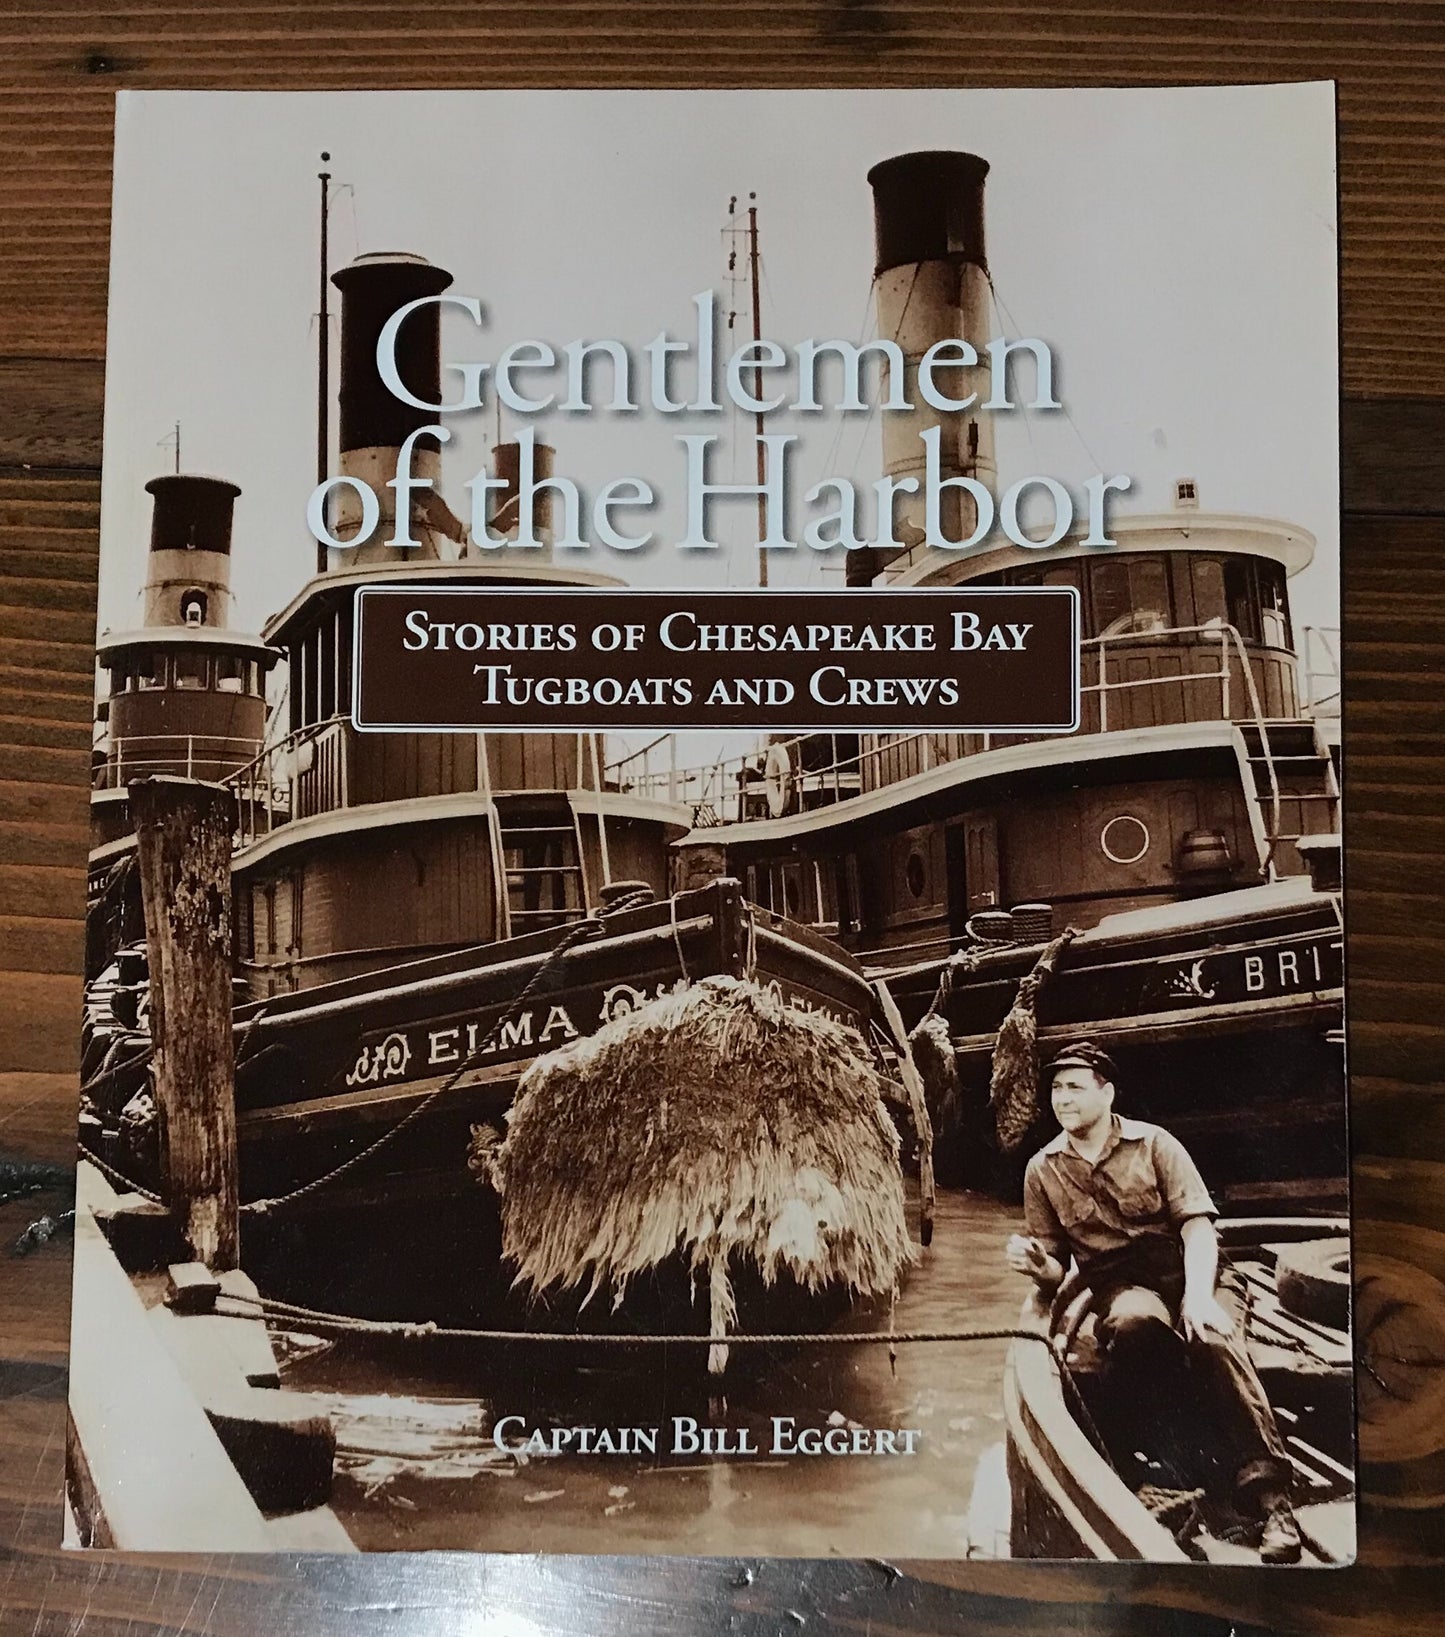 Book, "Gentleman of the Harbor Stories of Chesapeake Bay Tugboats and Crews"